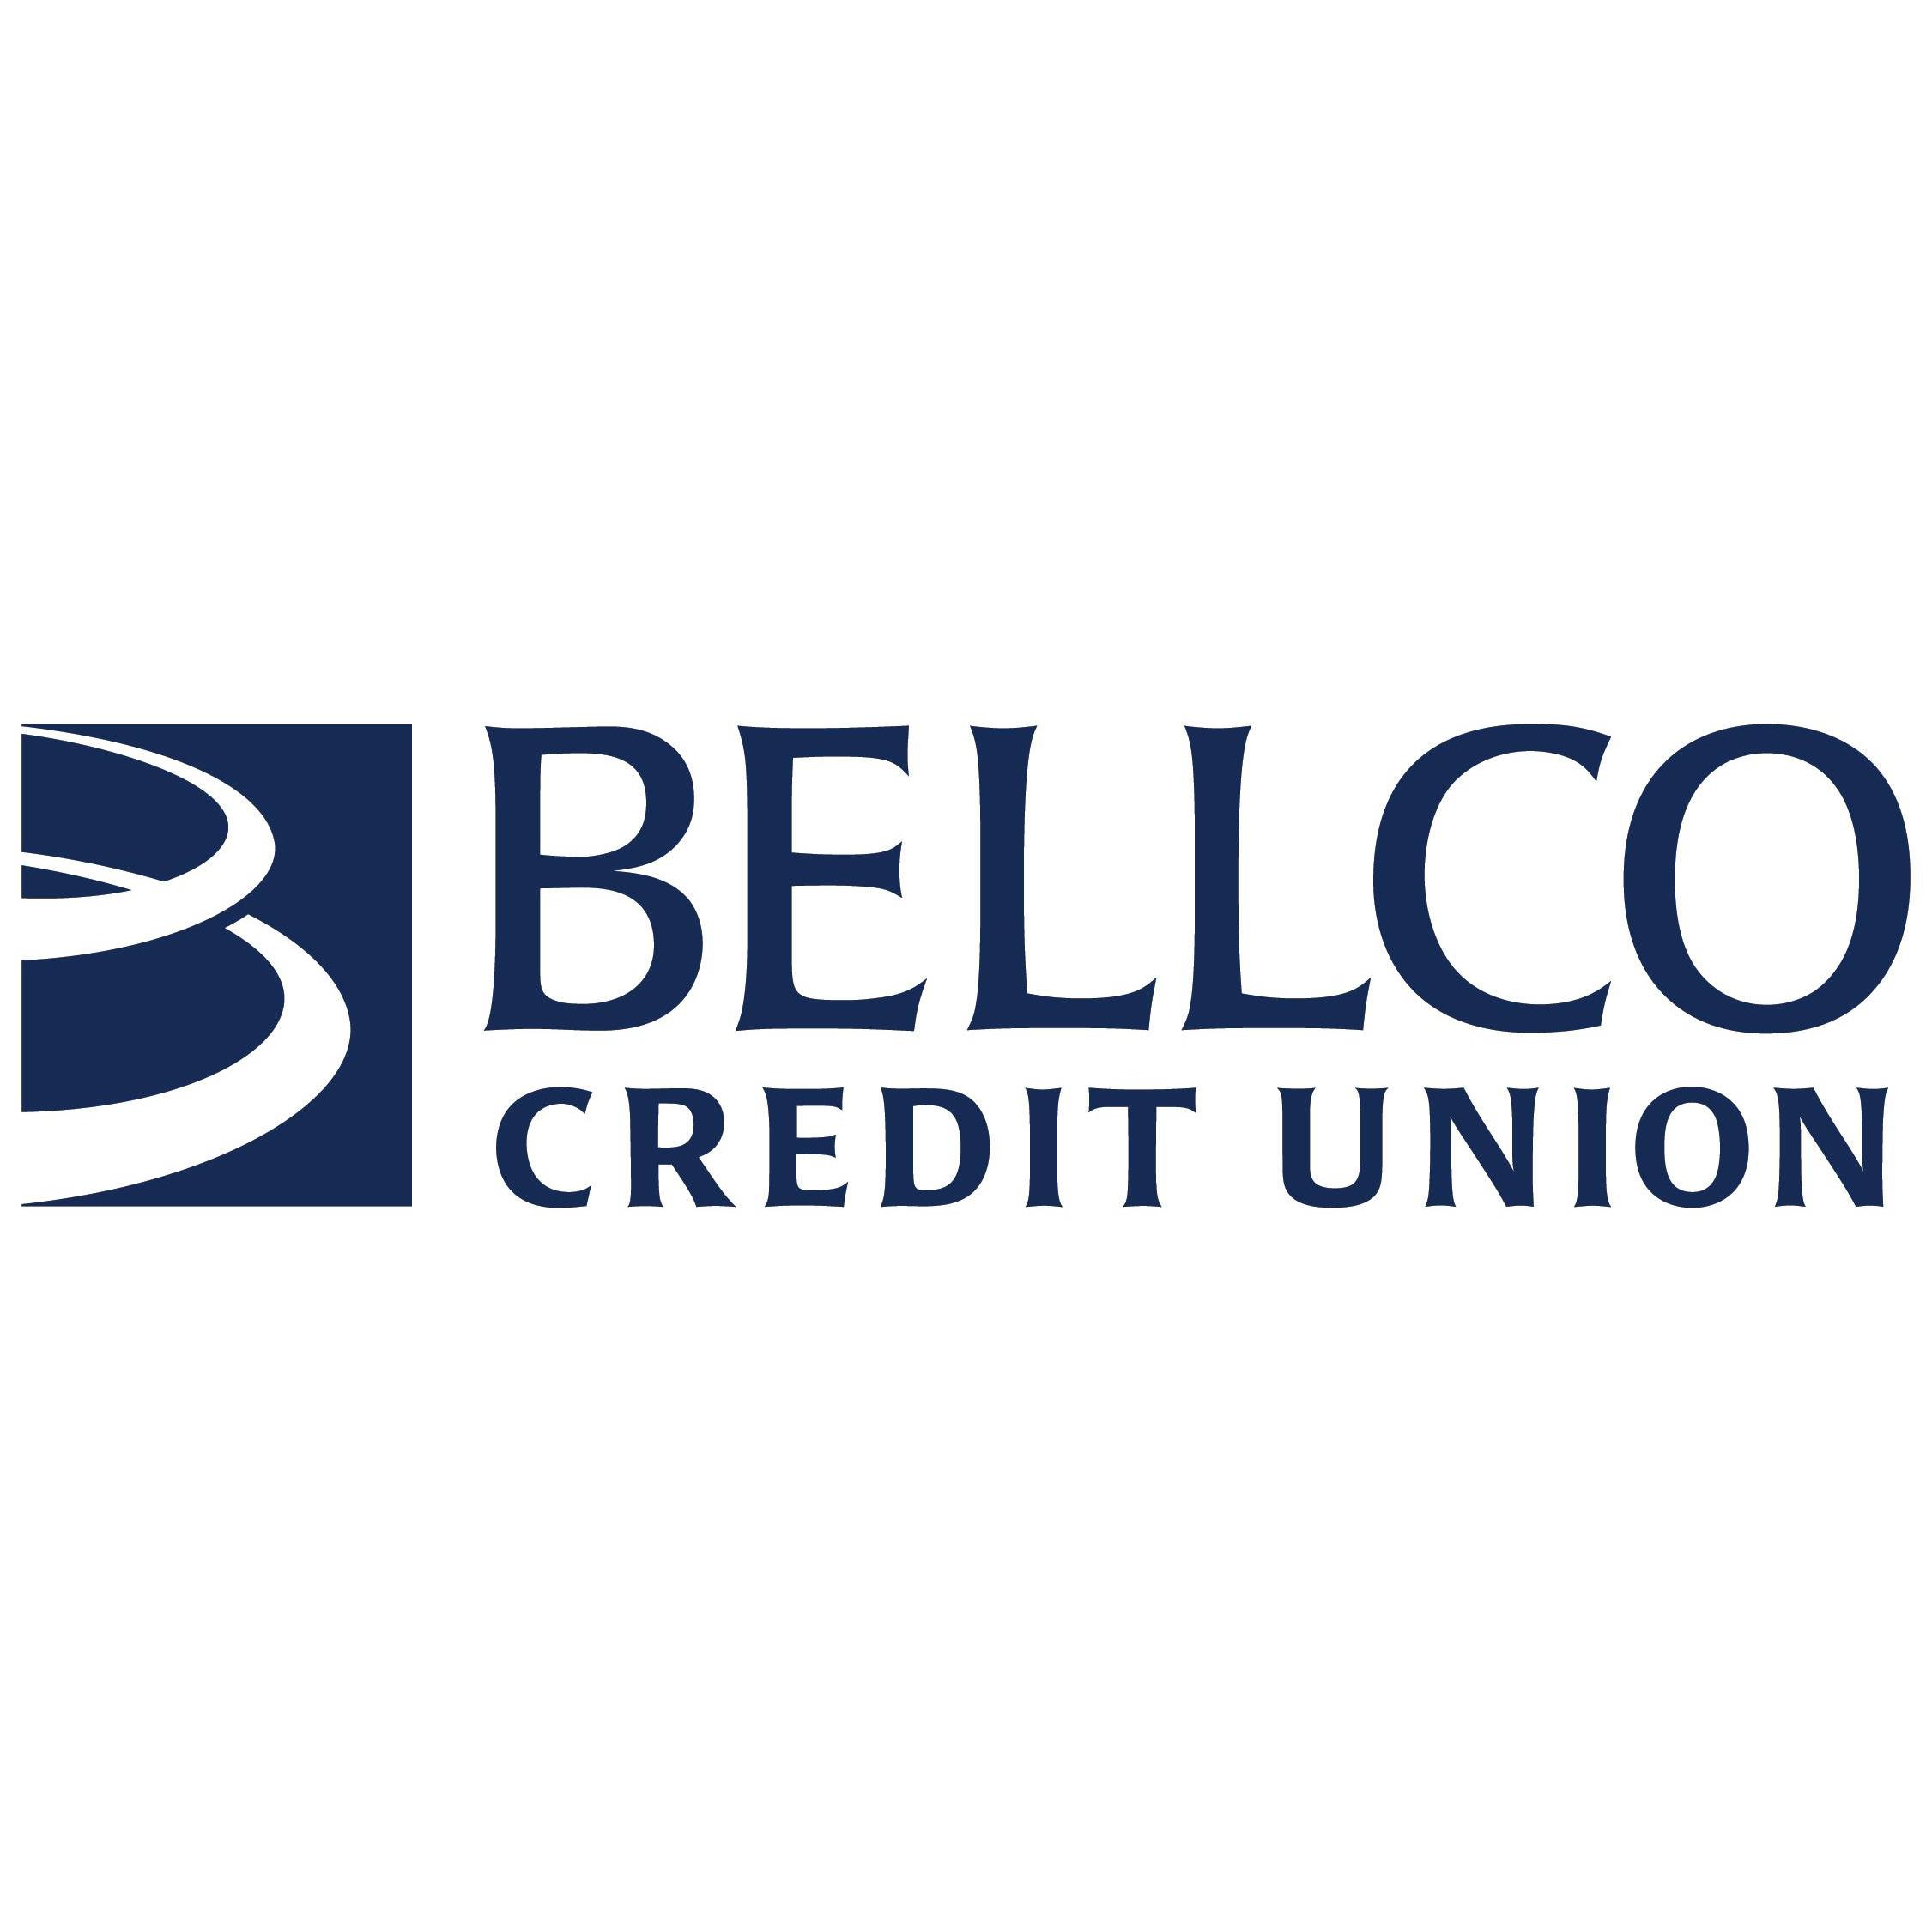 Bellco Credit Union - Fort Collins, CO 80525 - (800)235-5261 | ShowMeLocal.com